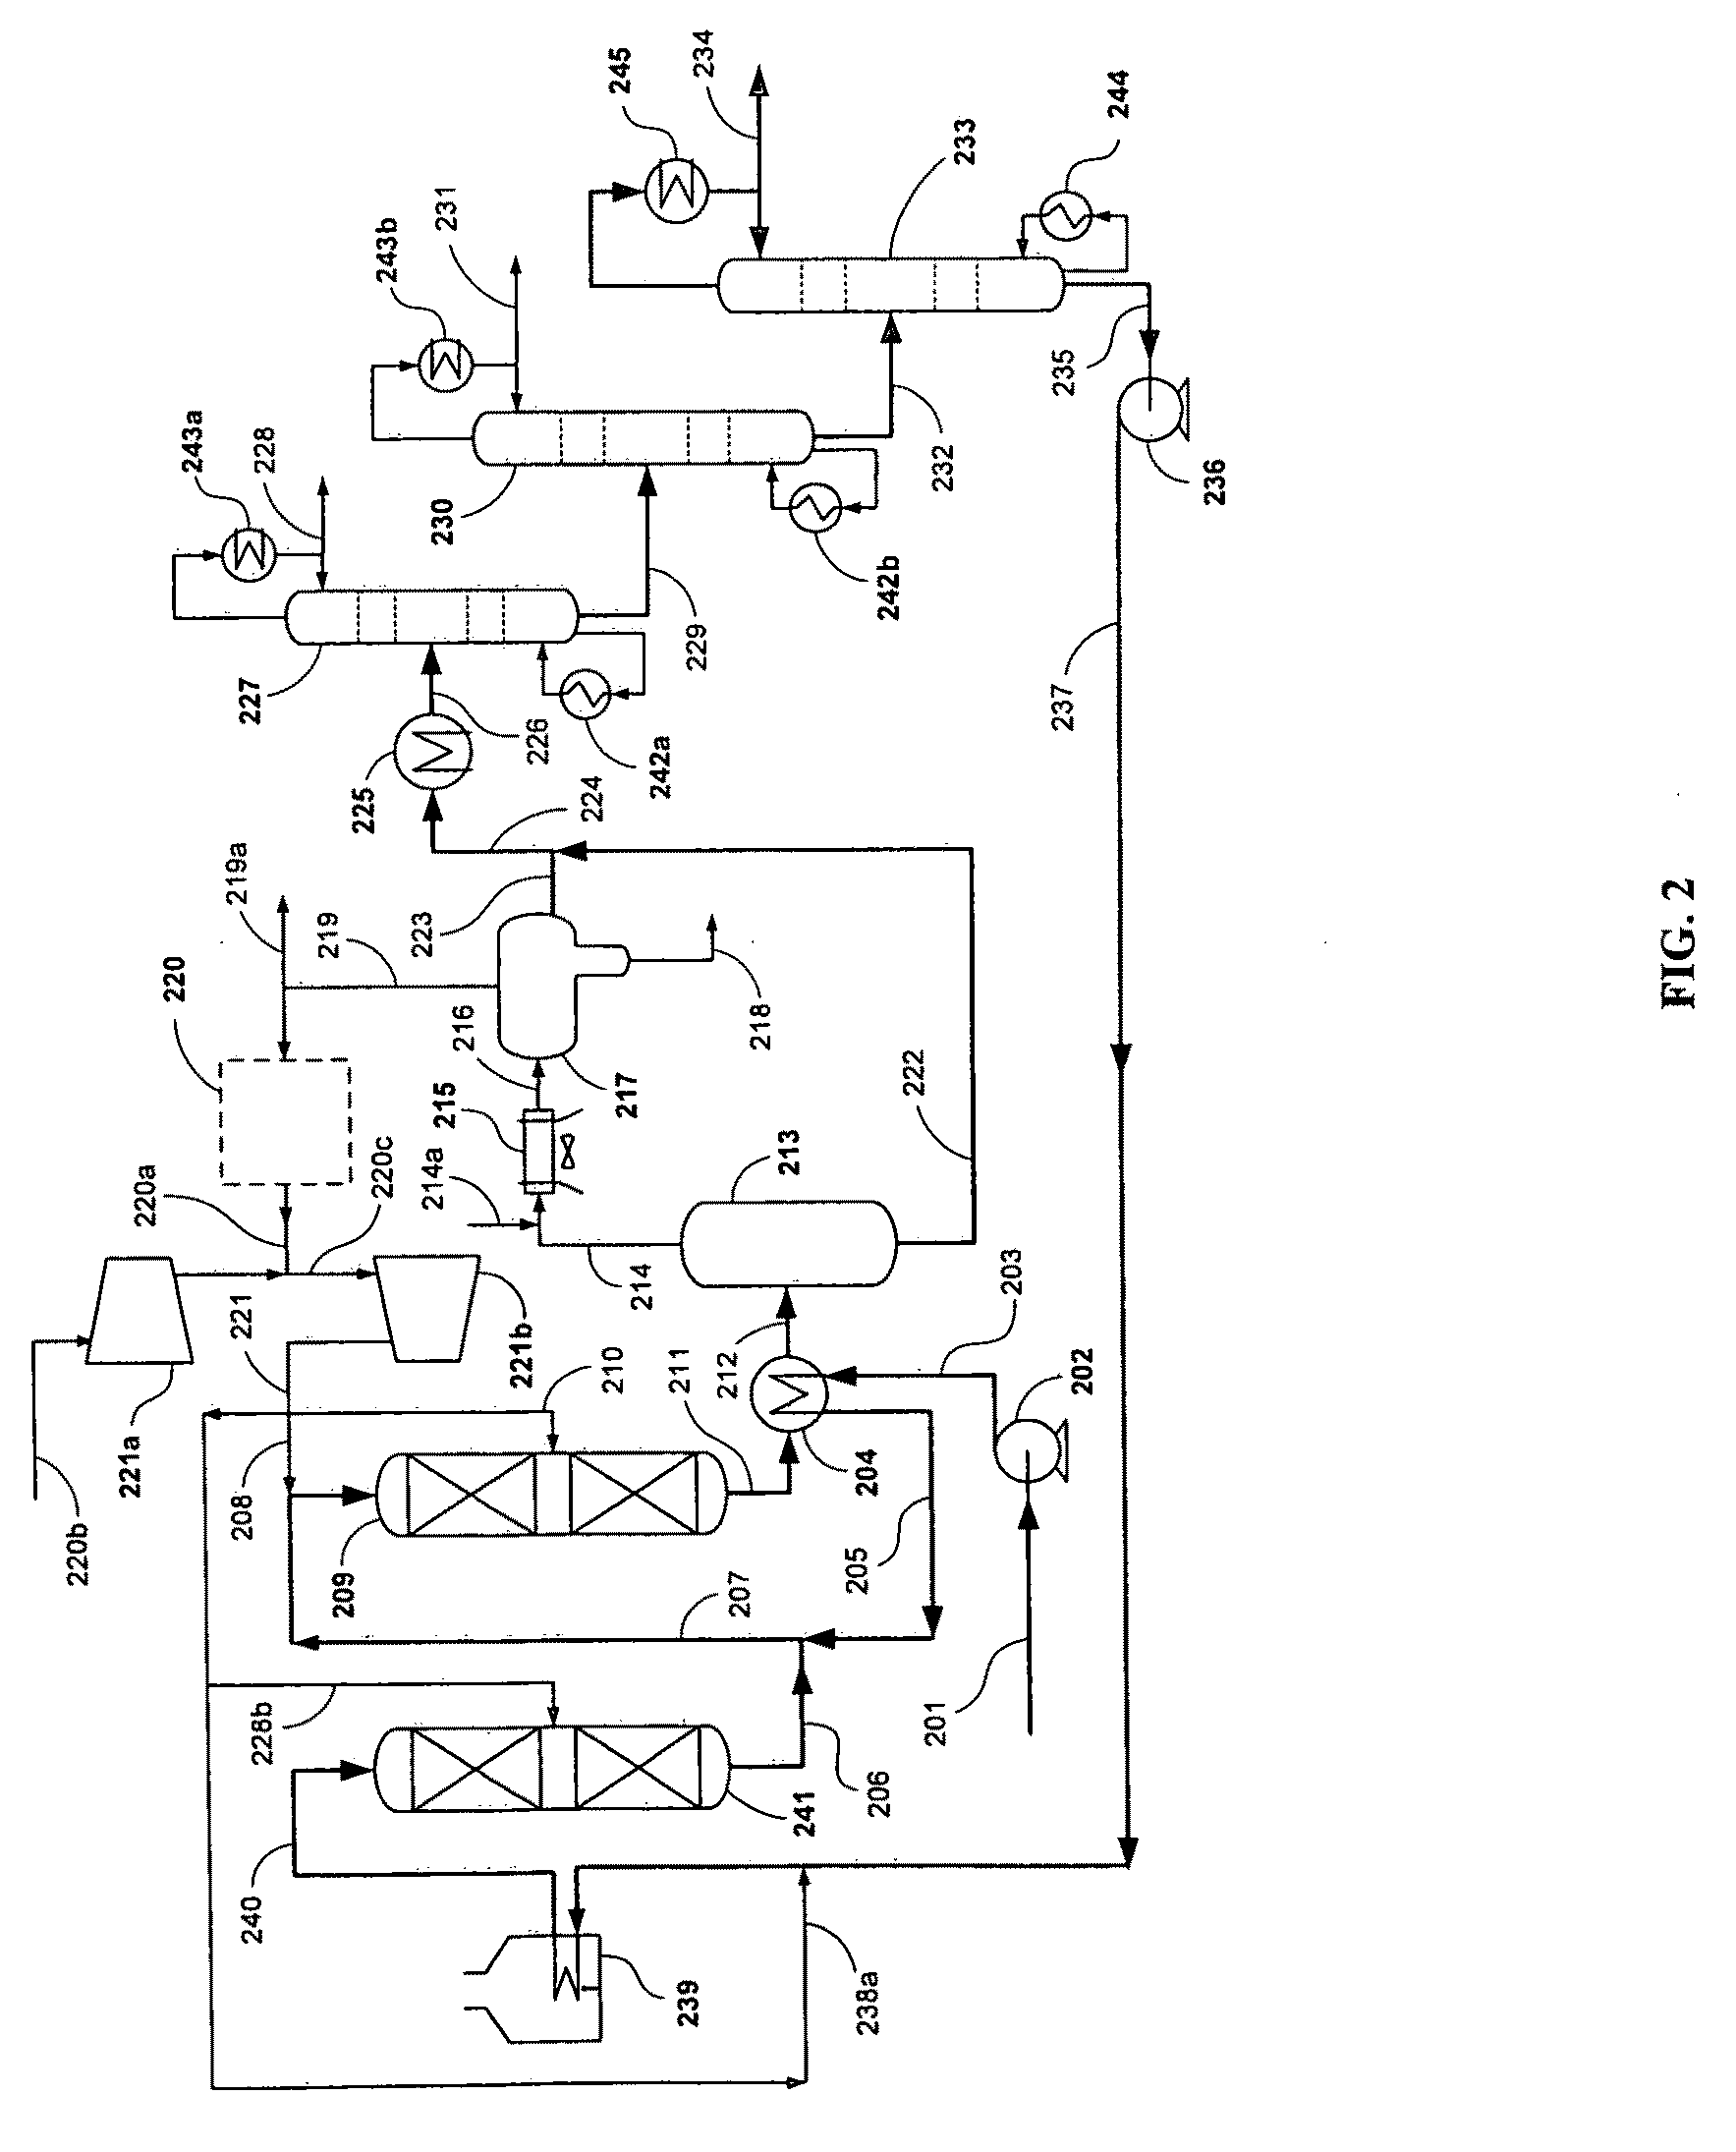 Hydrocracking process for biological feedstocks and hydrocarbons produced therefrom